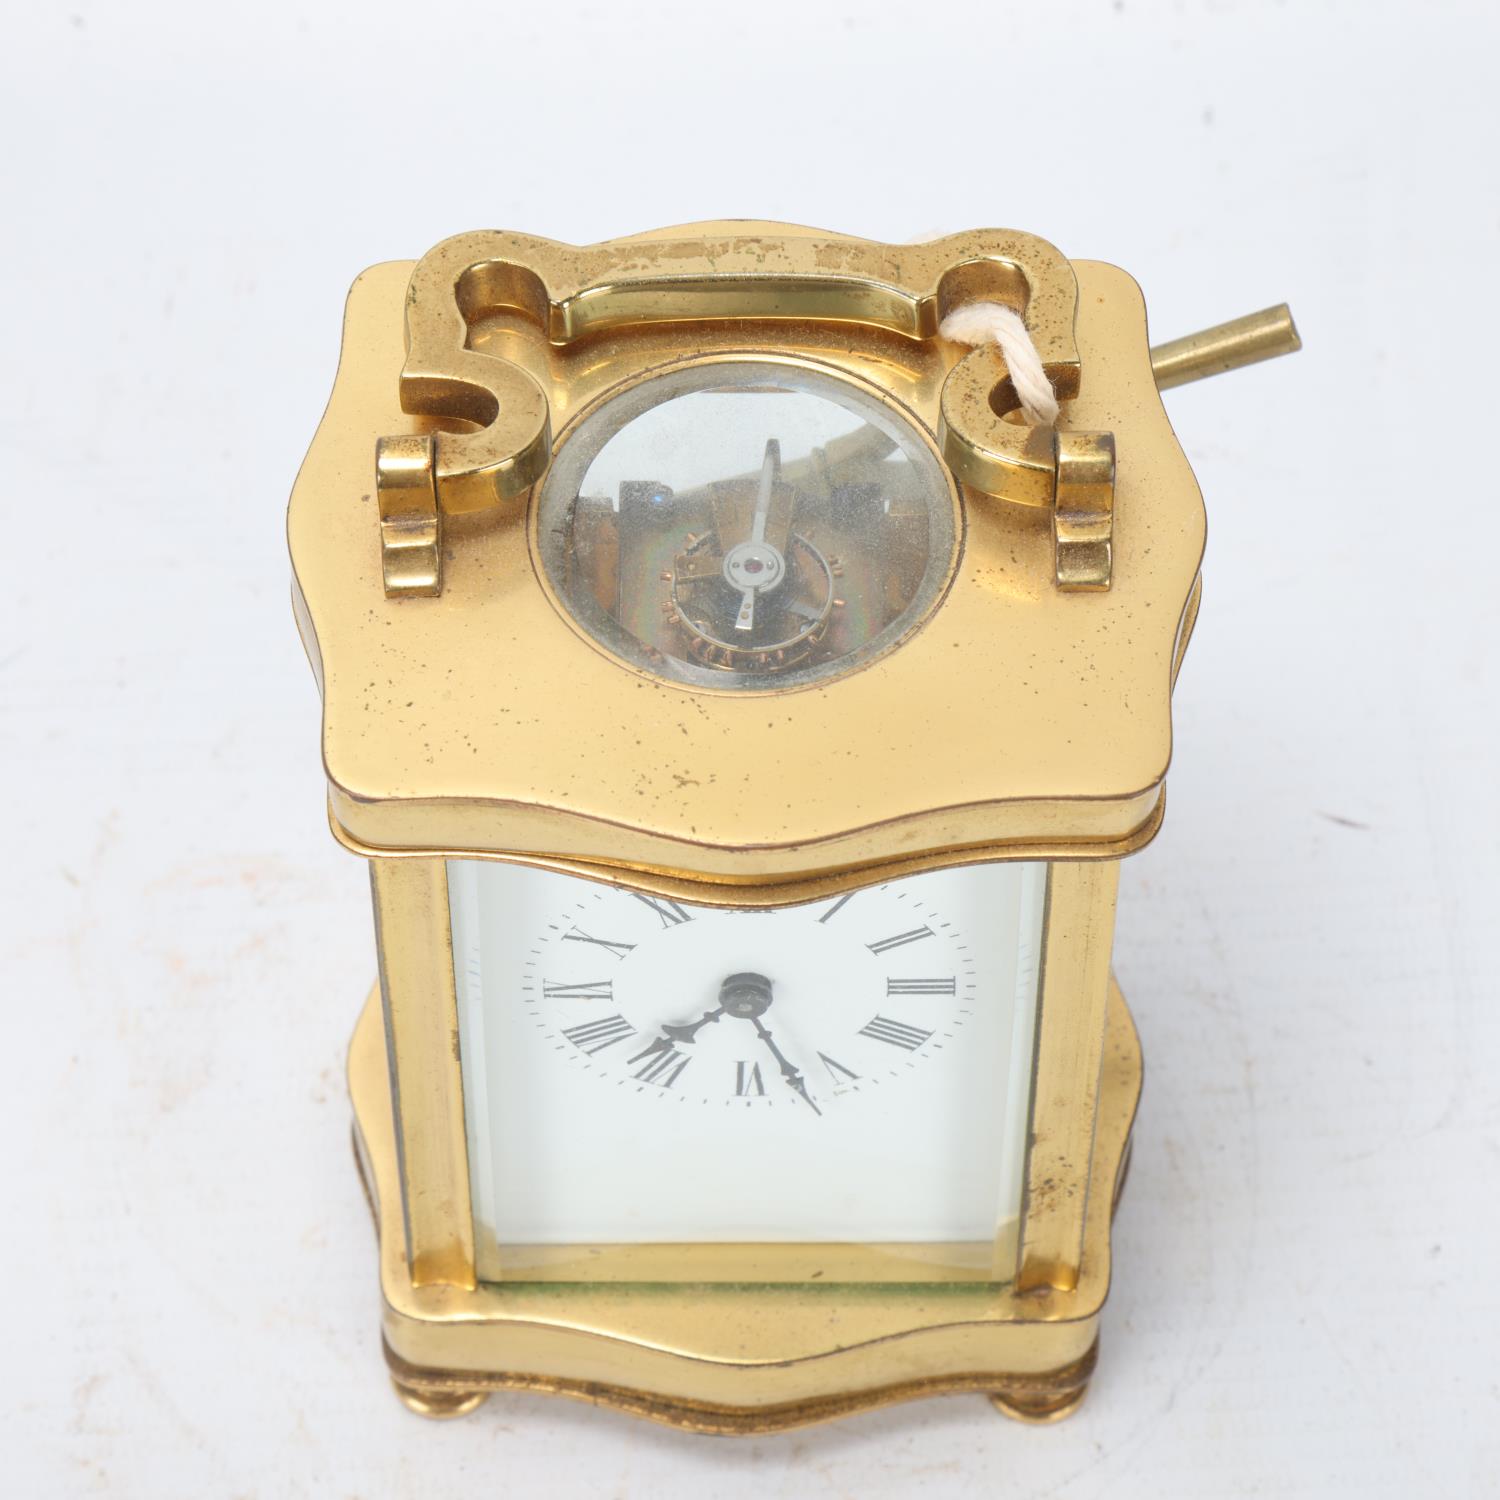 French brass-cased carriage clock, case height 12cm Case and dial in good condition but not seen - Image 3 of 3